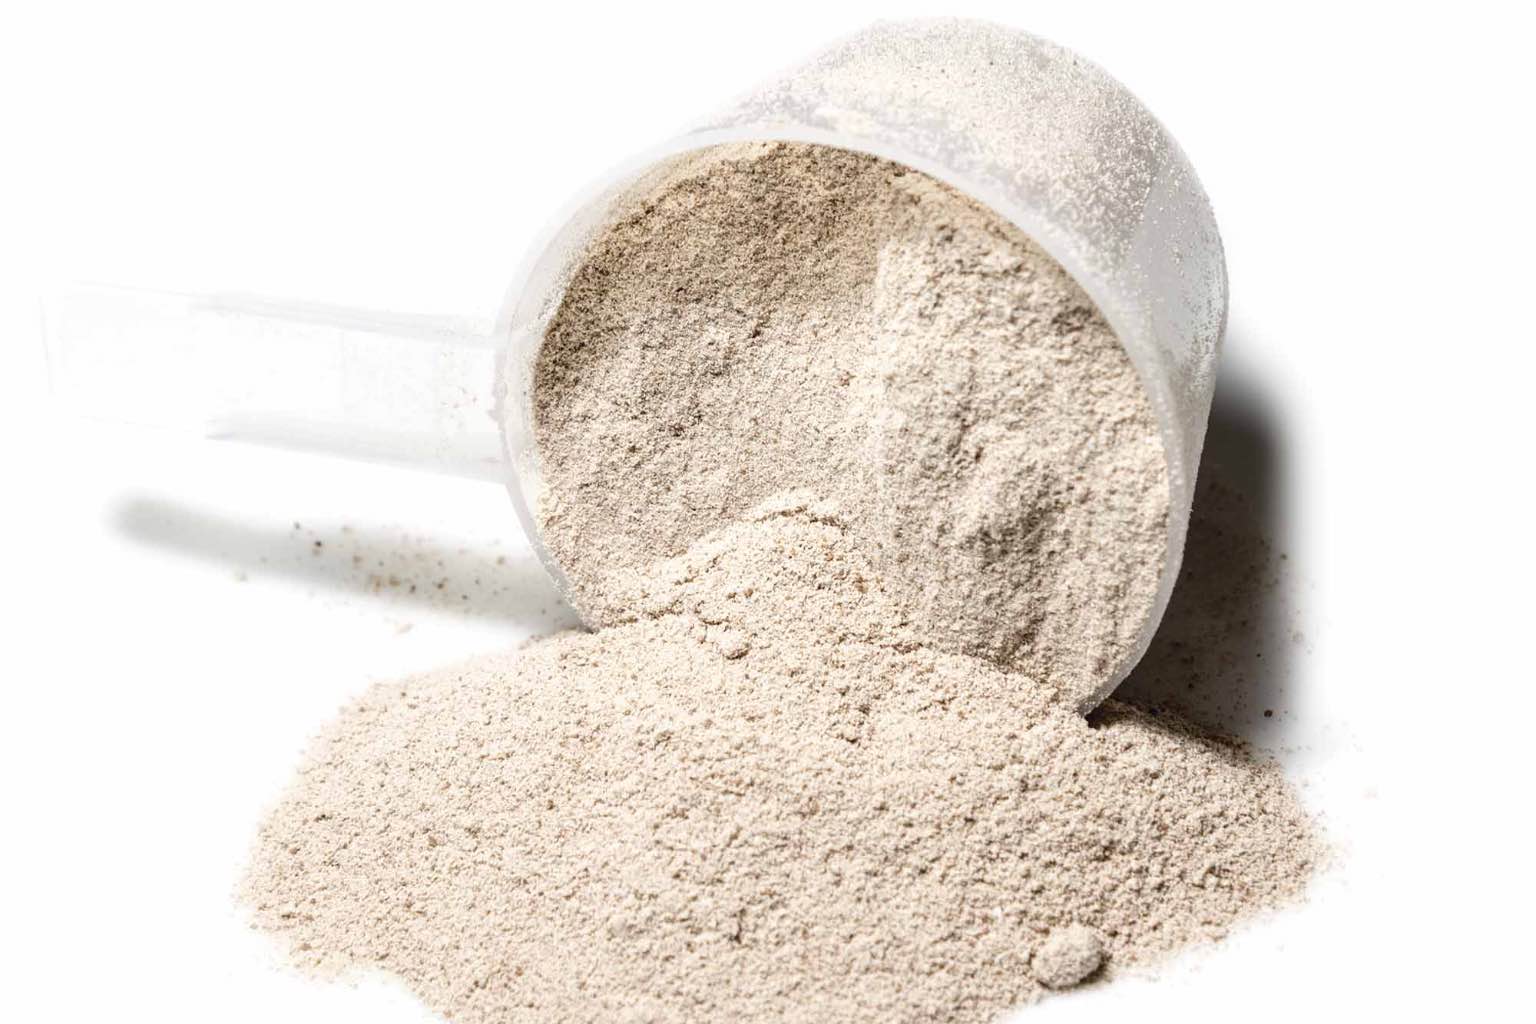 A scoop of protein powder.